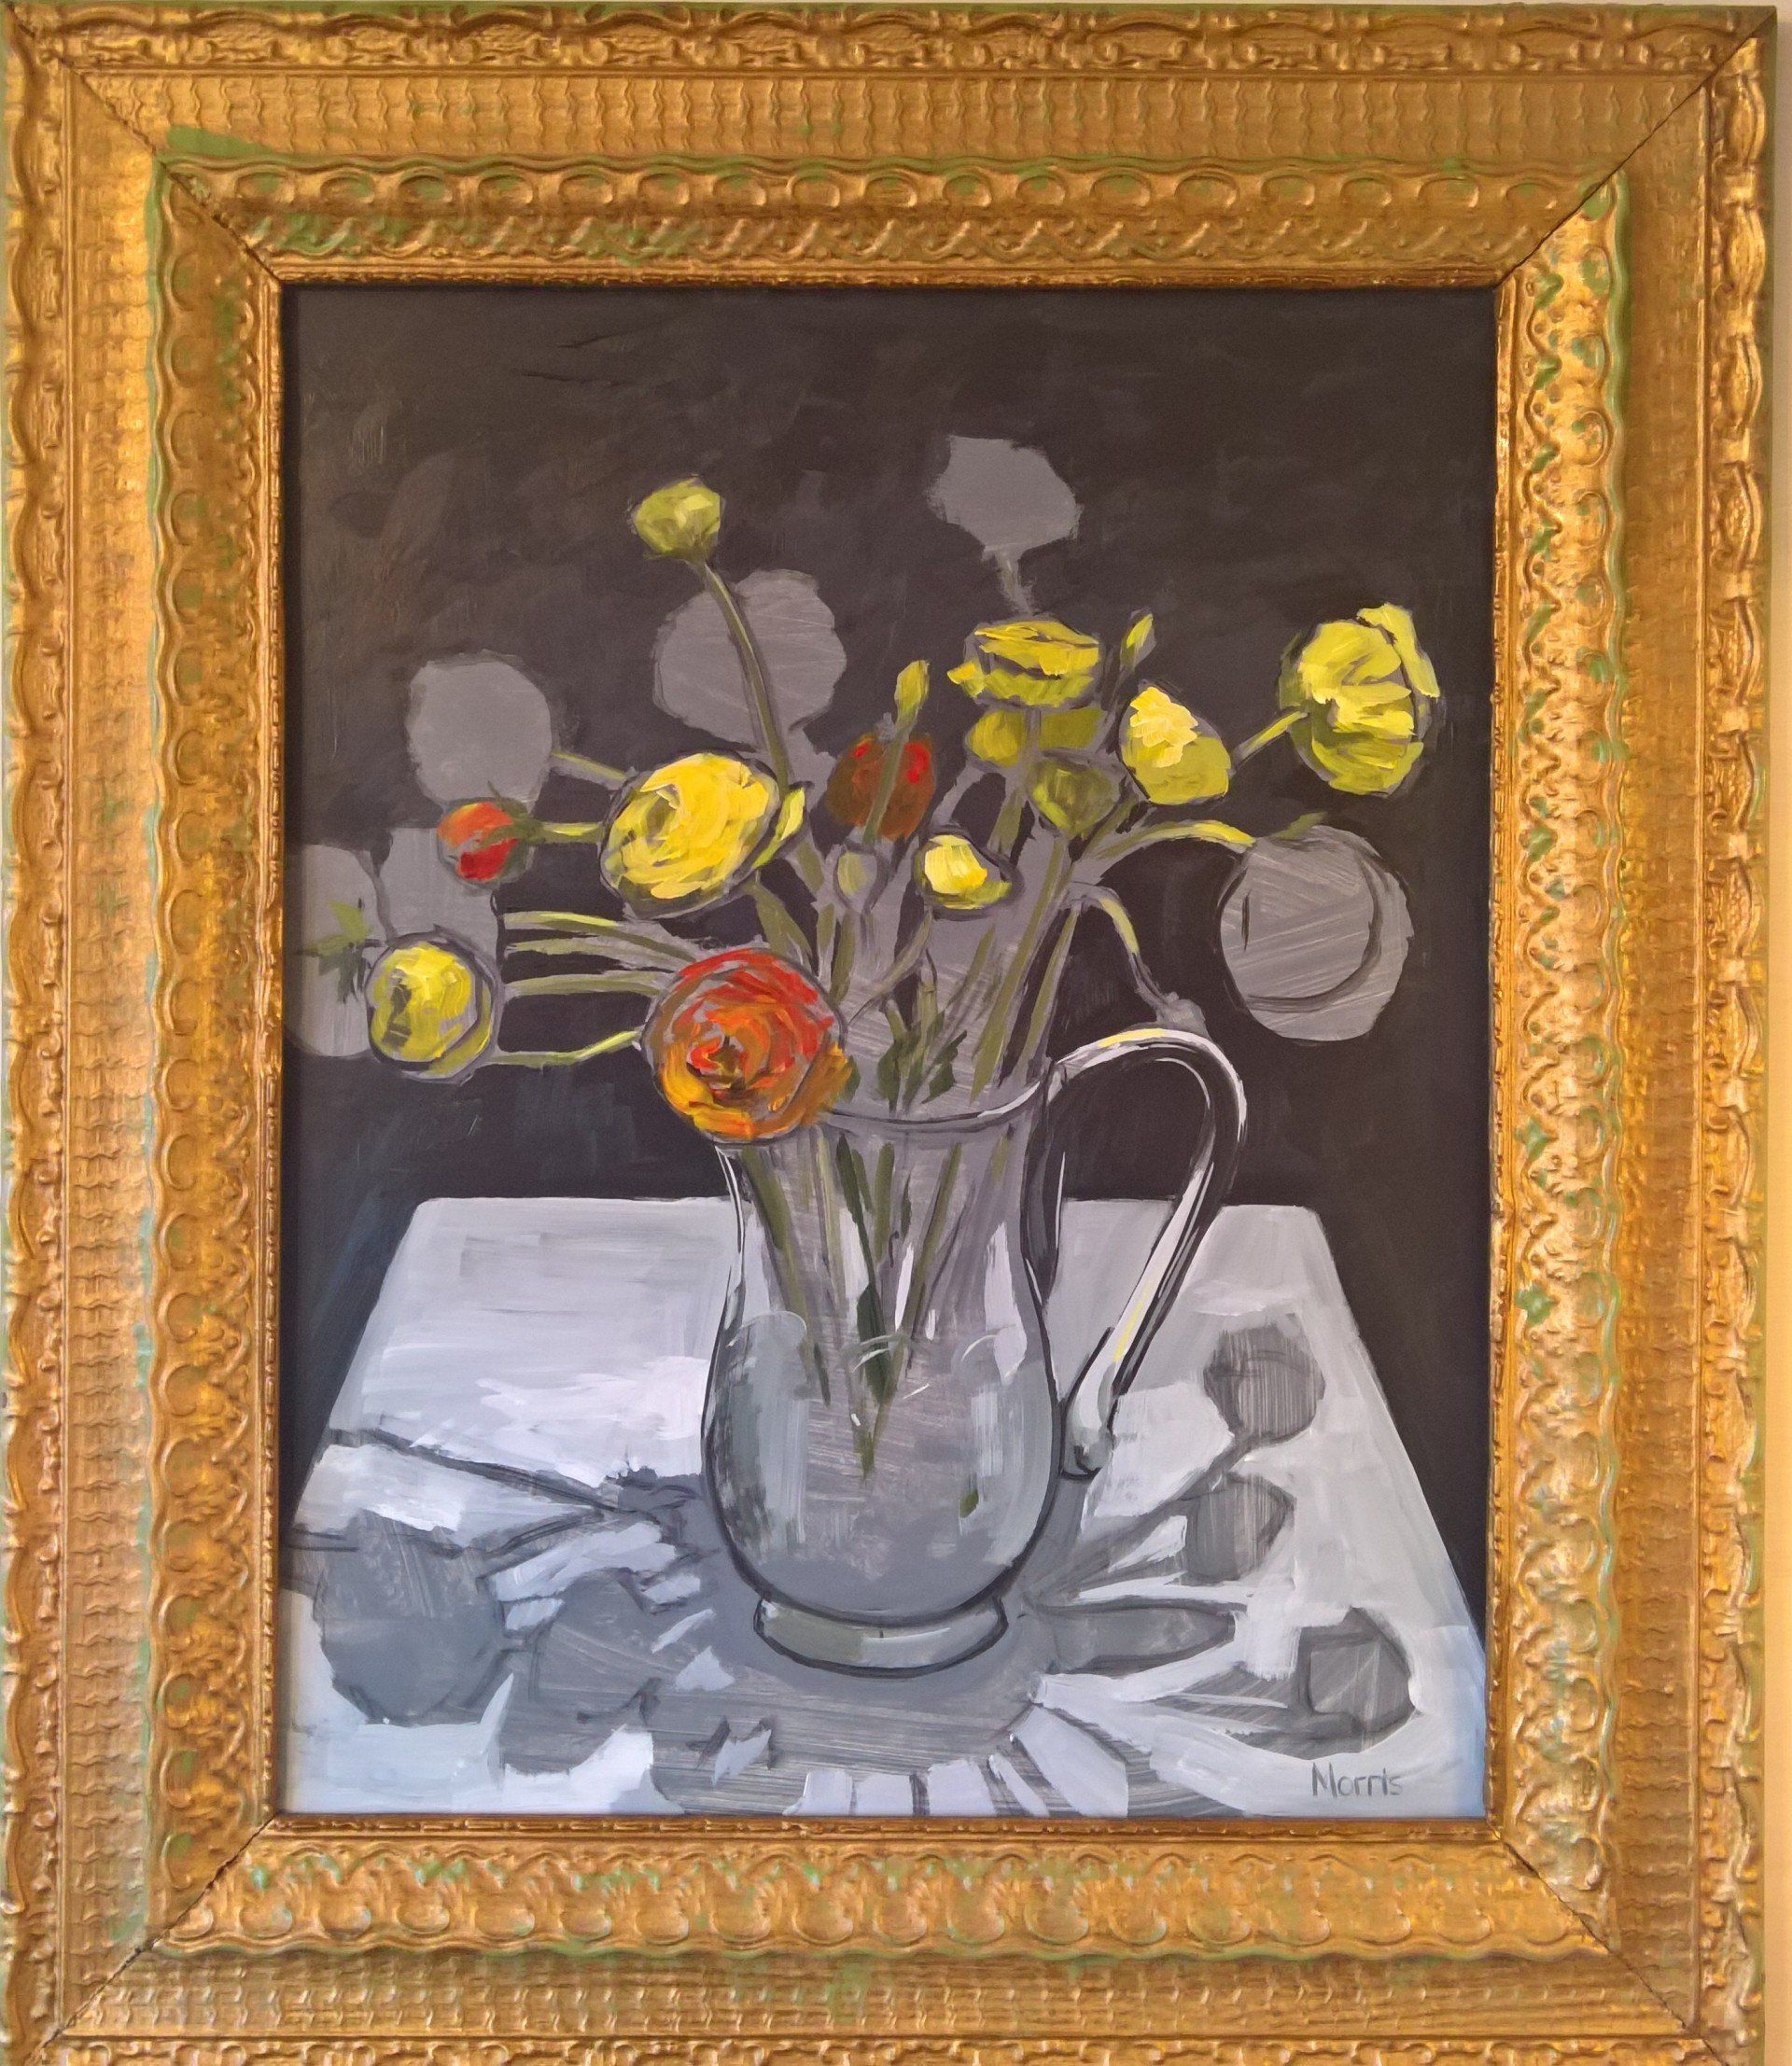 Kevin Brent Morris, Yellow Ranunculus, Acrylic on panel, 20 x 16 in, $1000 ($100/mo), Available at the gallery